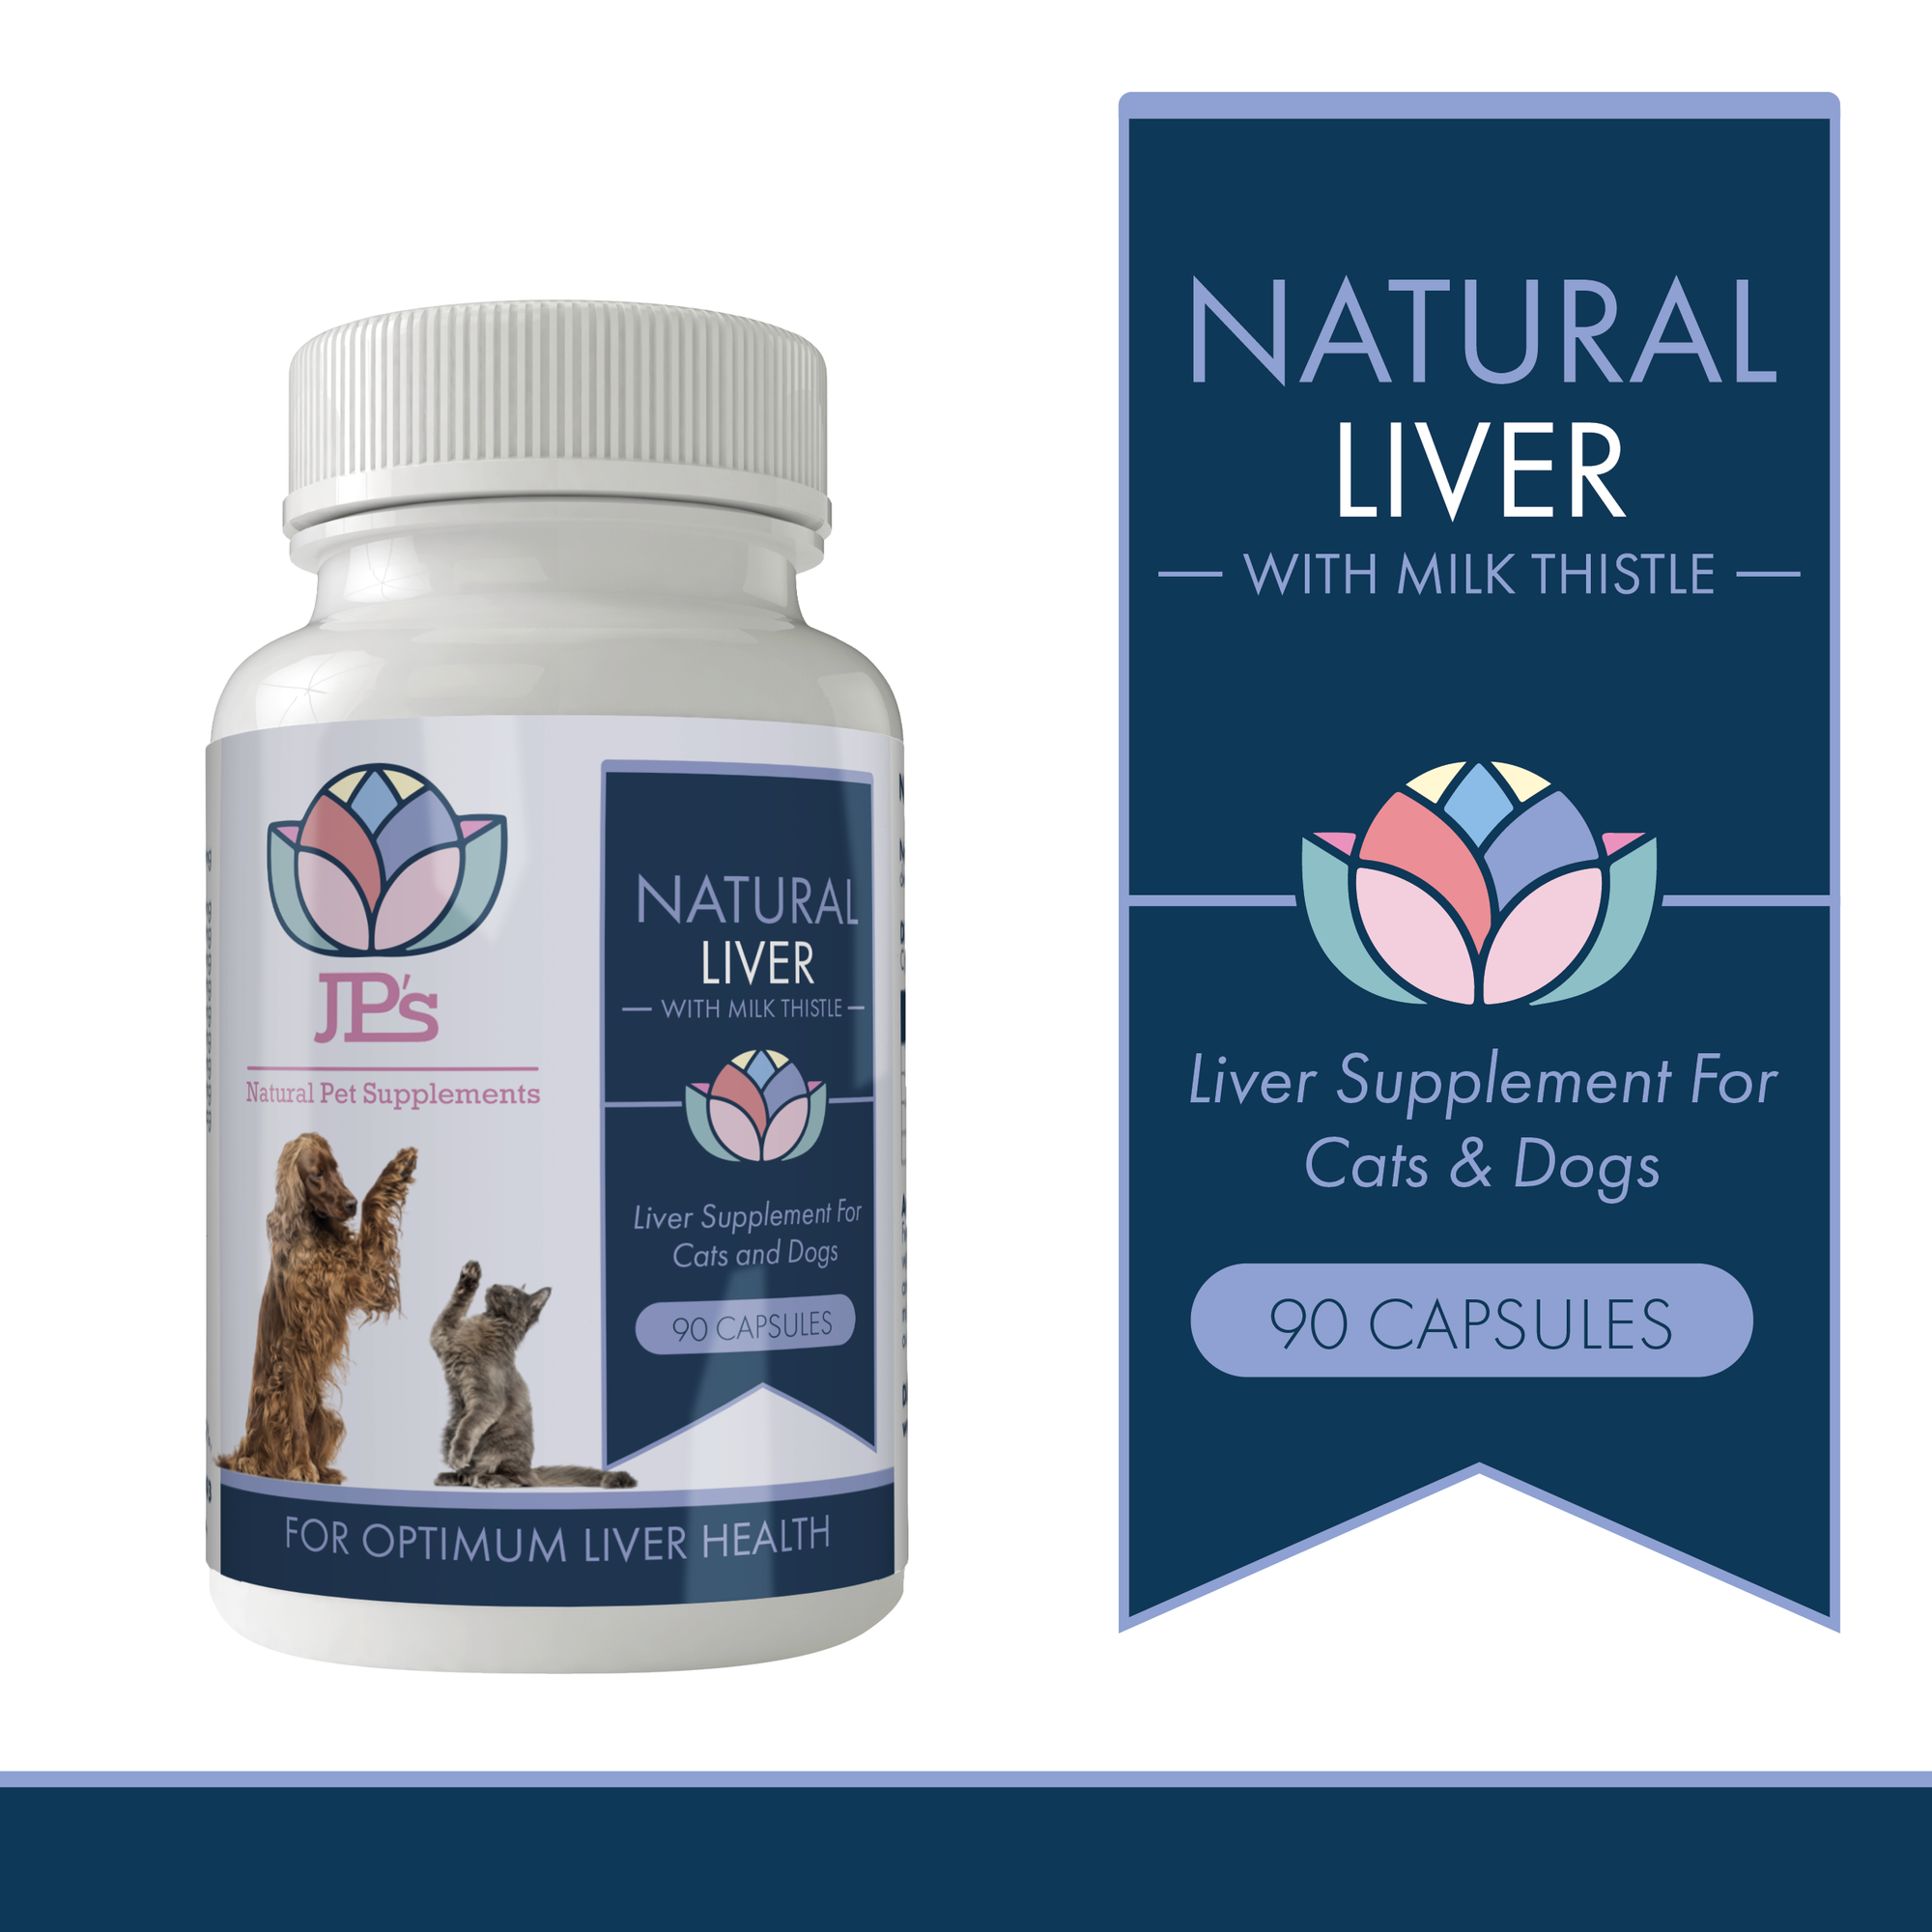 Liver supplement with milk thistle for cats & dogs